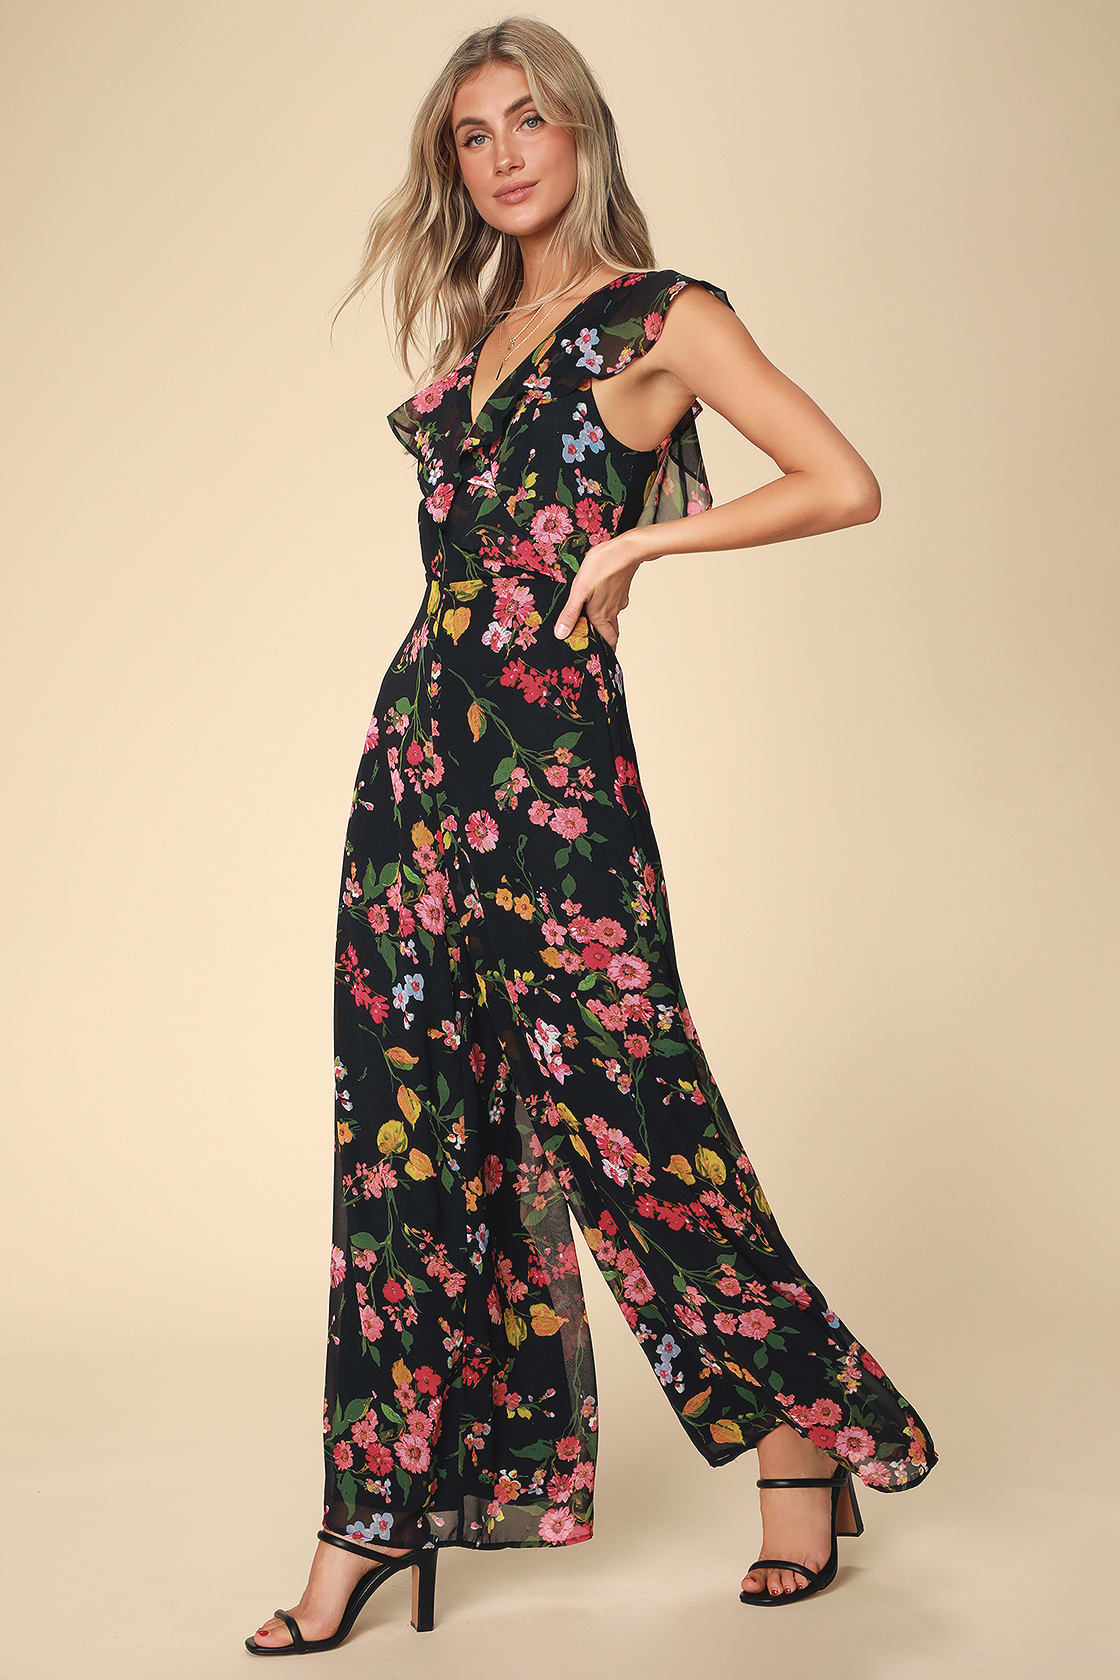 Black and Pink Floral Ruffled Jumpsuit for Summer Wedding Guest and for Beach Wedding Guest Outfit